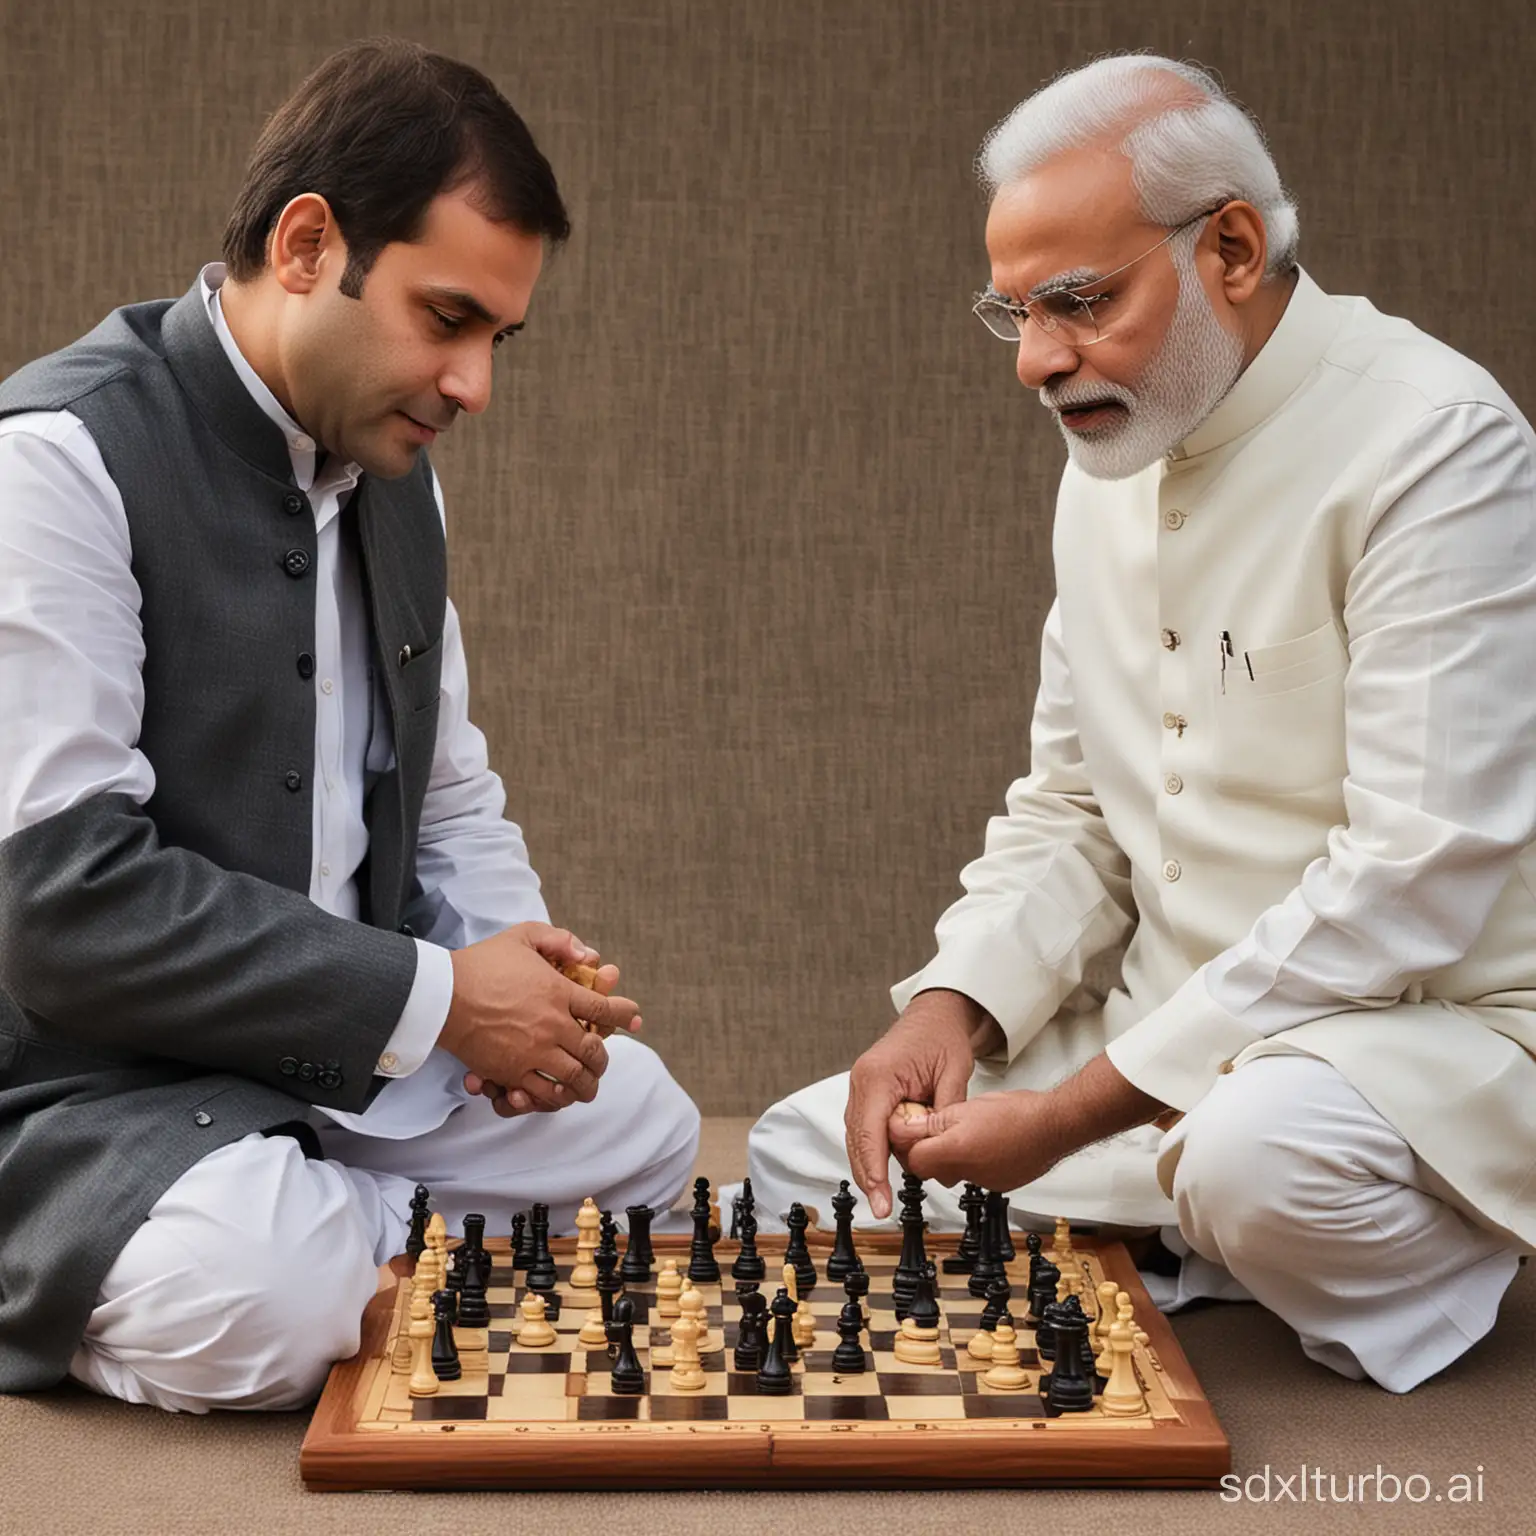 Political-Leaders-Narendra-Modi-and-Rahul-Gandhi-Engaged-in-Chess-Match